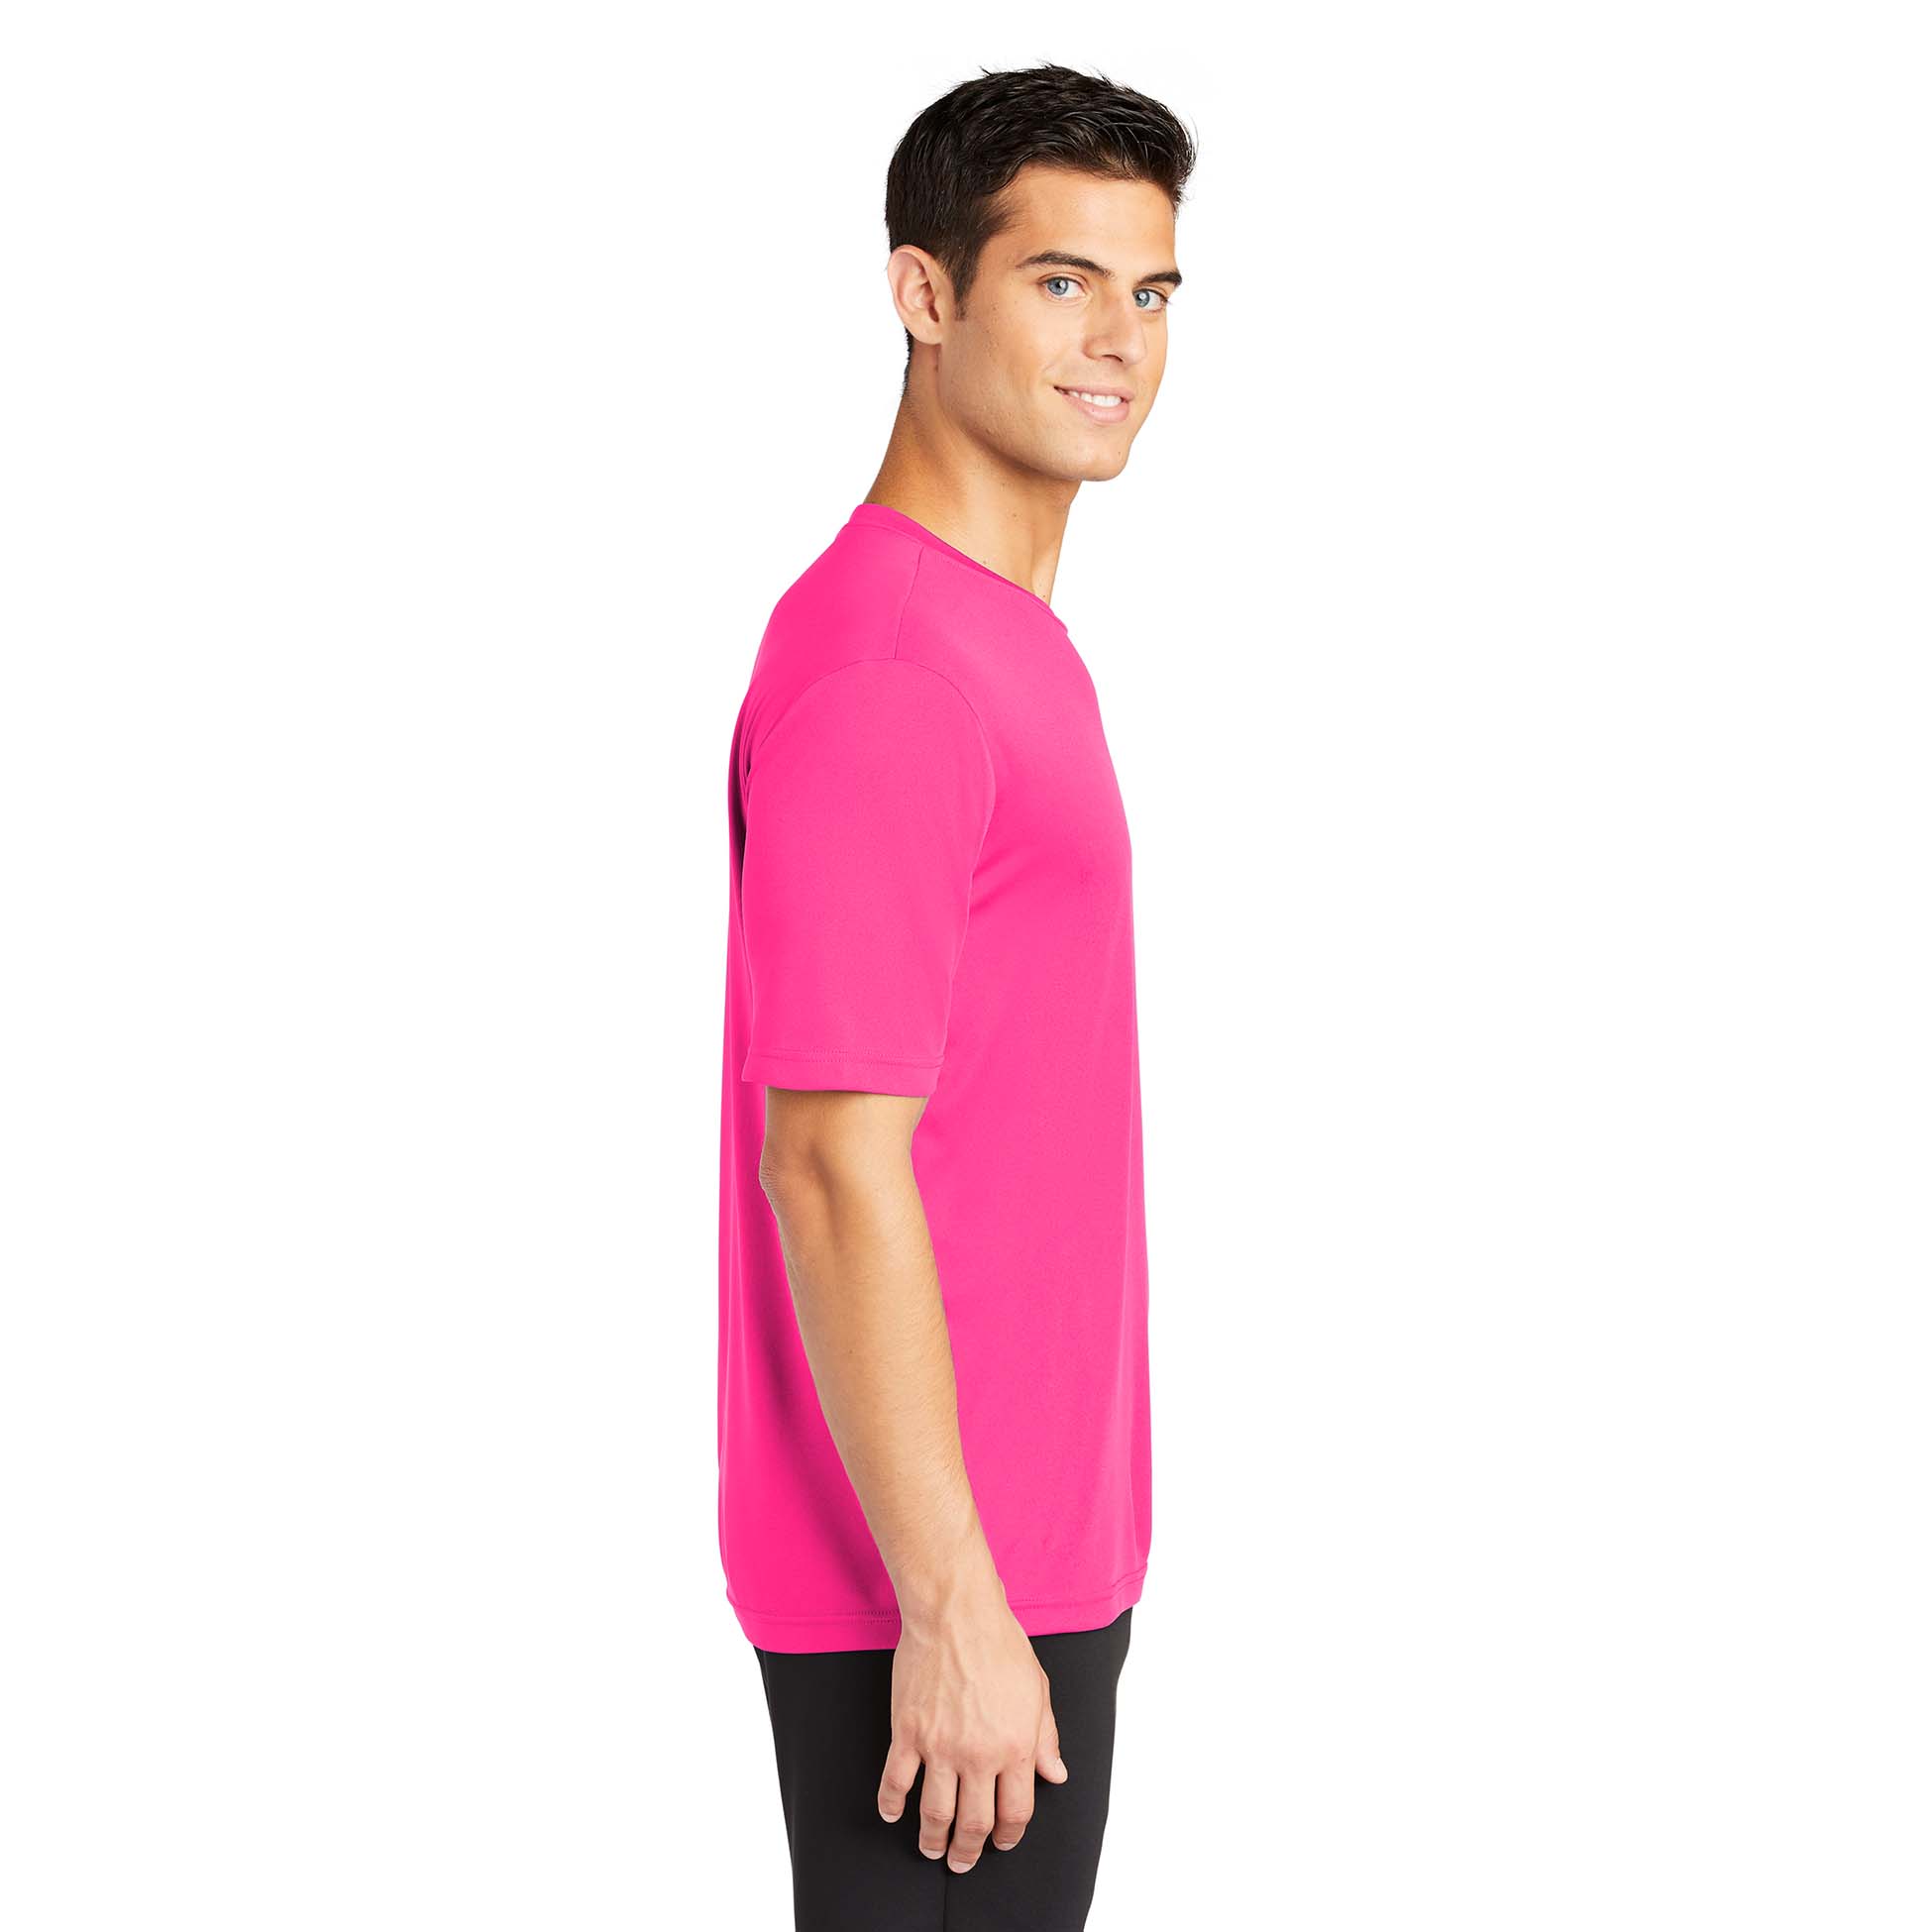 ST350 Competitor Source Tee Sport-Tek | Neon Full - PosiCharge Pink